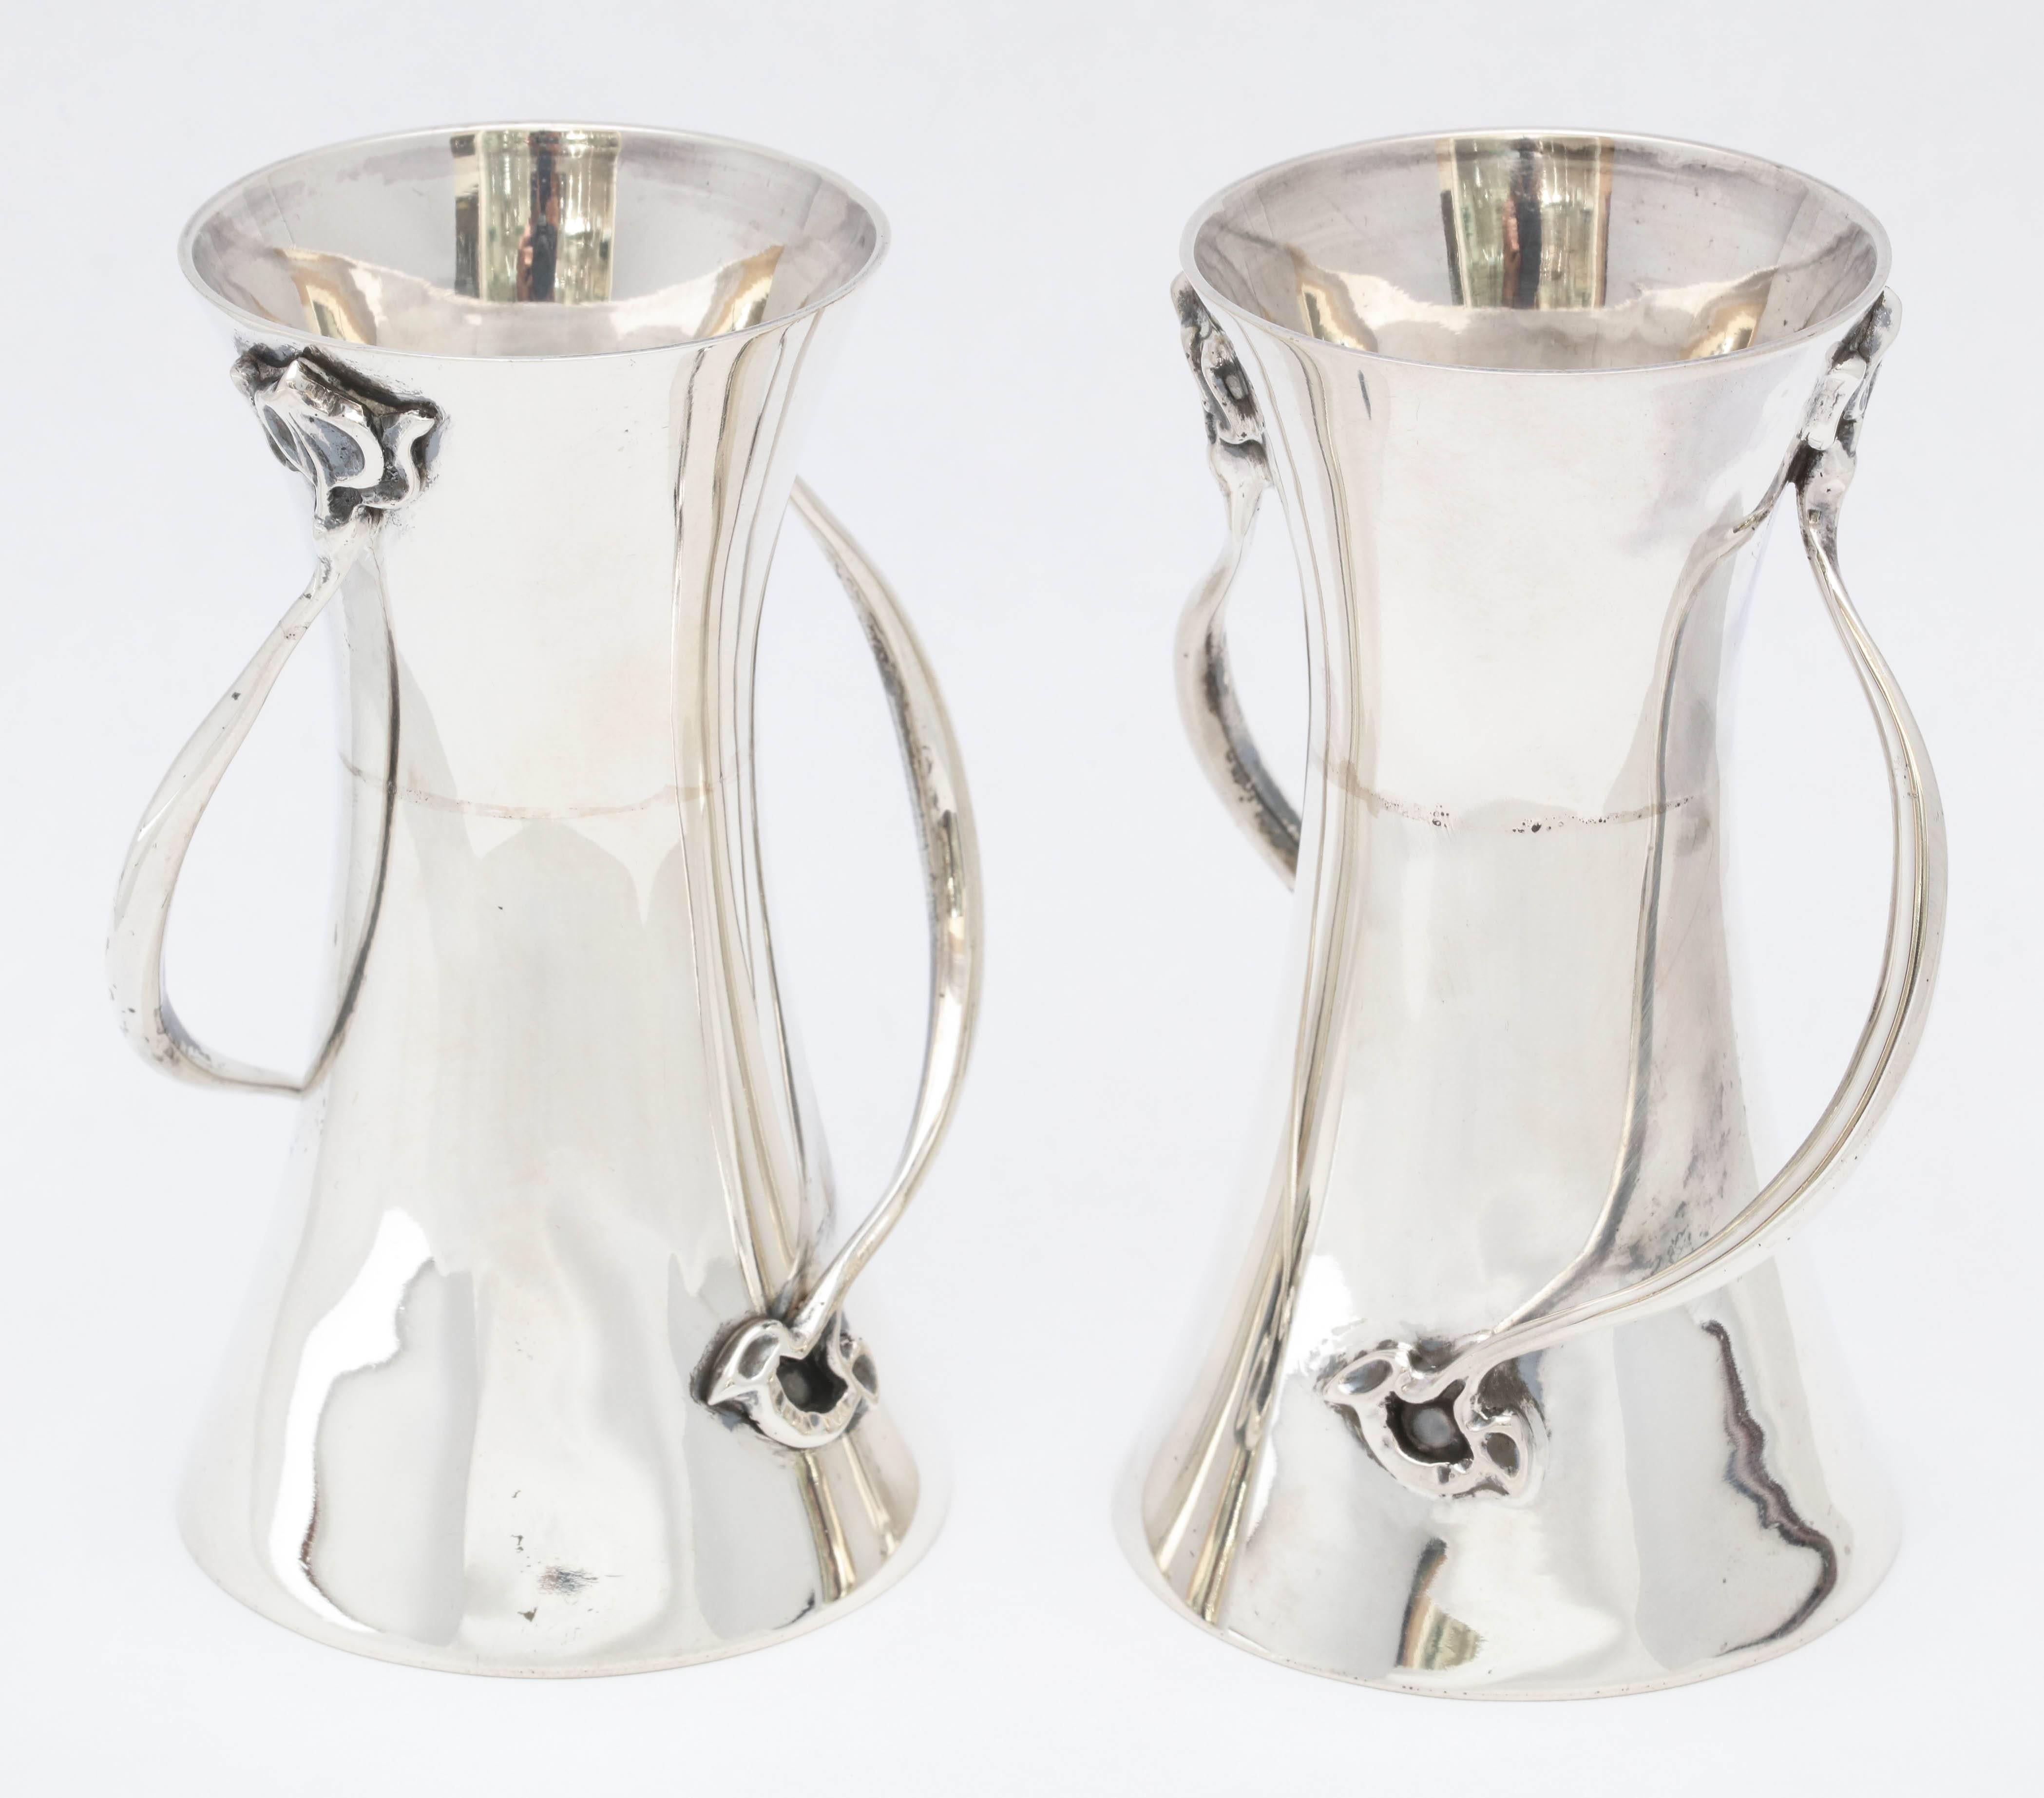 Rare Pair of Art Nouveau Sterling Silver Bud Vases 1